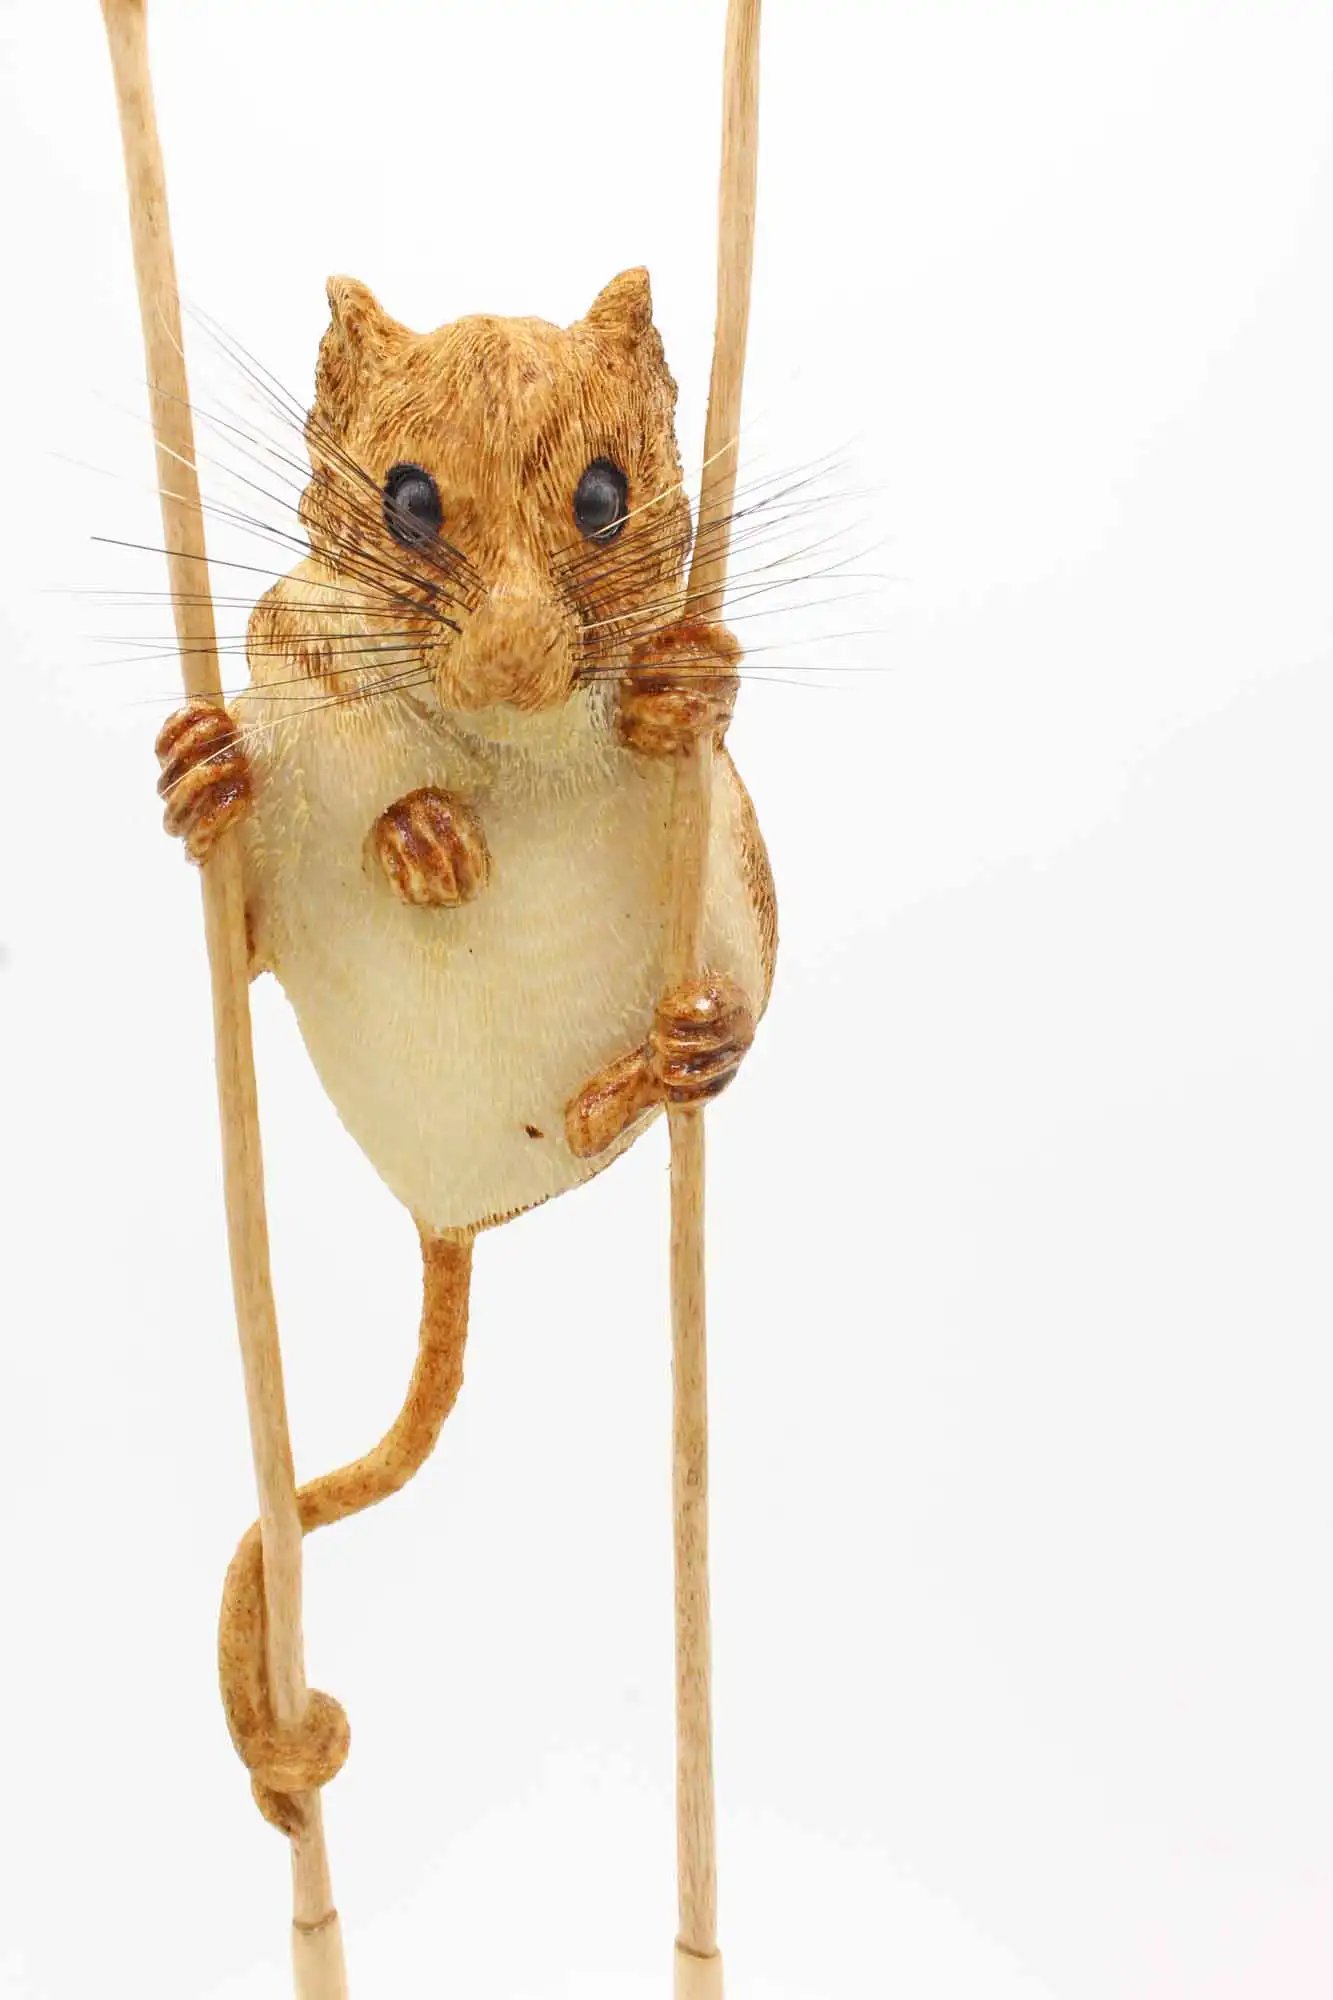 Mouse on wheat shafts woodcarving